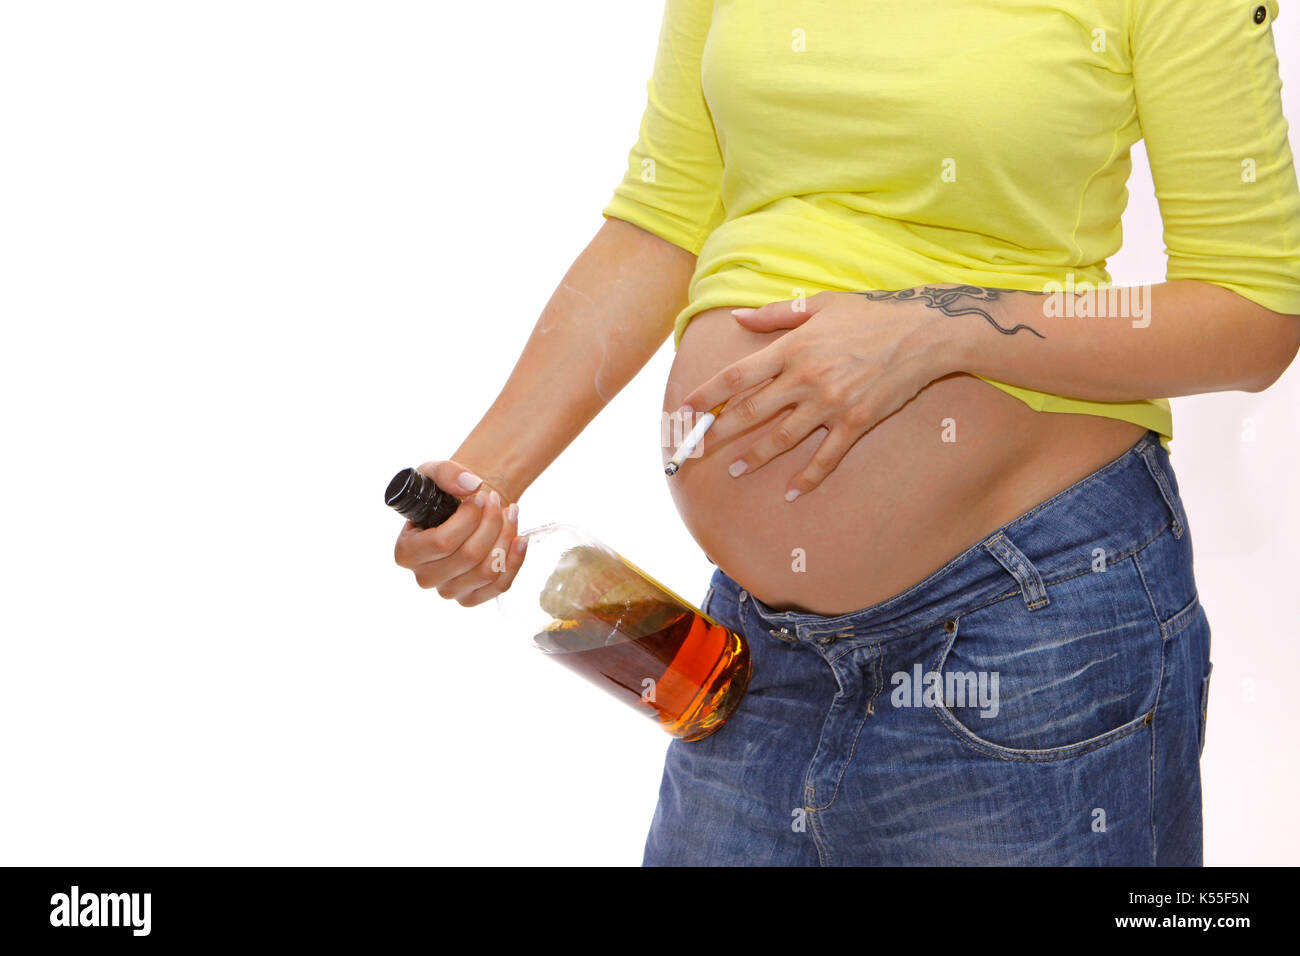 Pregnant woman with baby belly drinks alcohol and smokes a cigarette Stock Photo